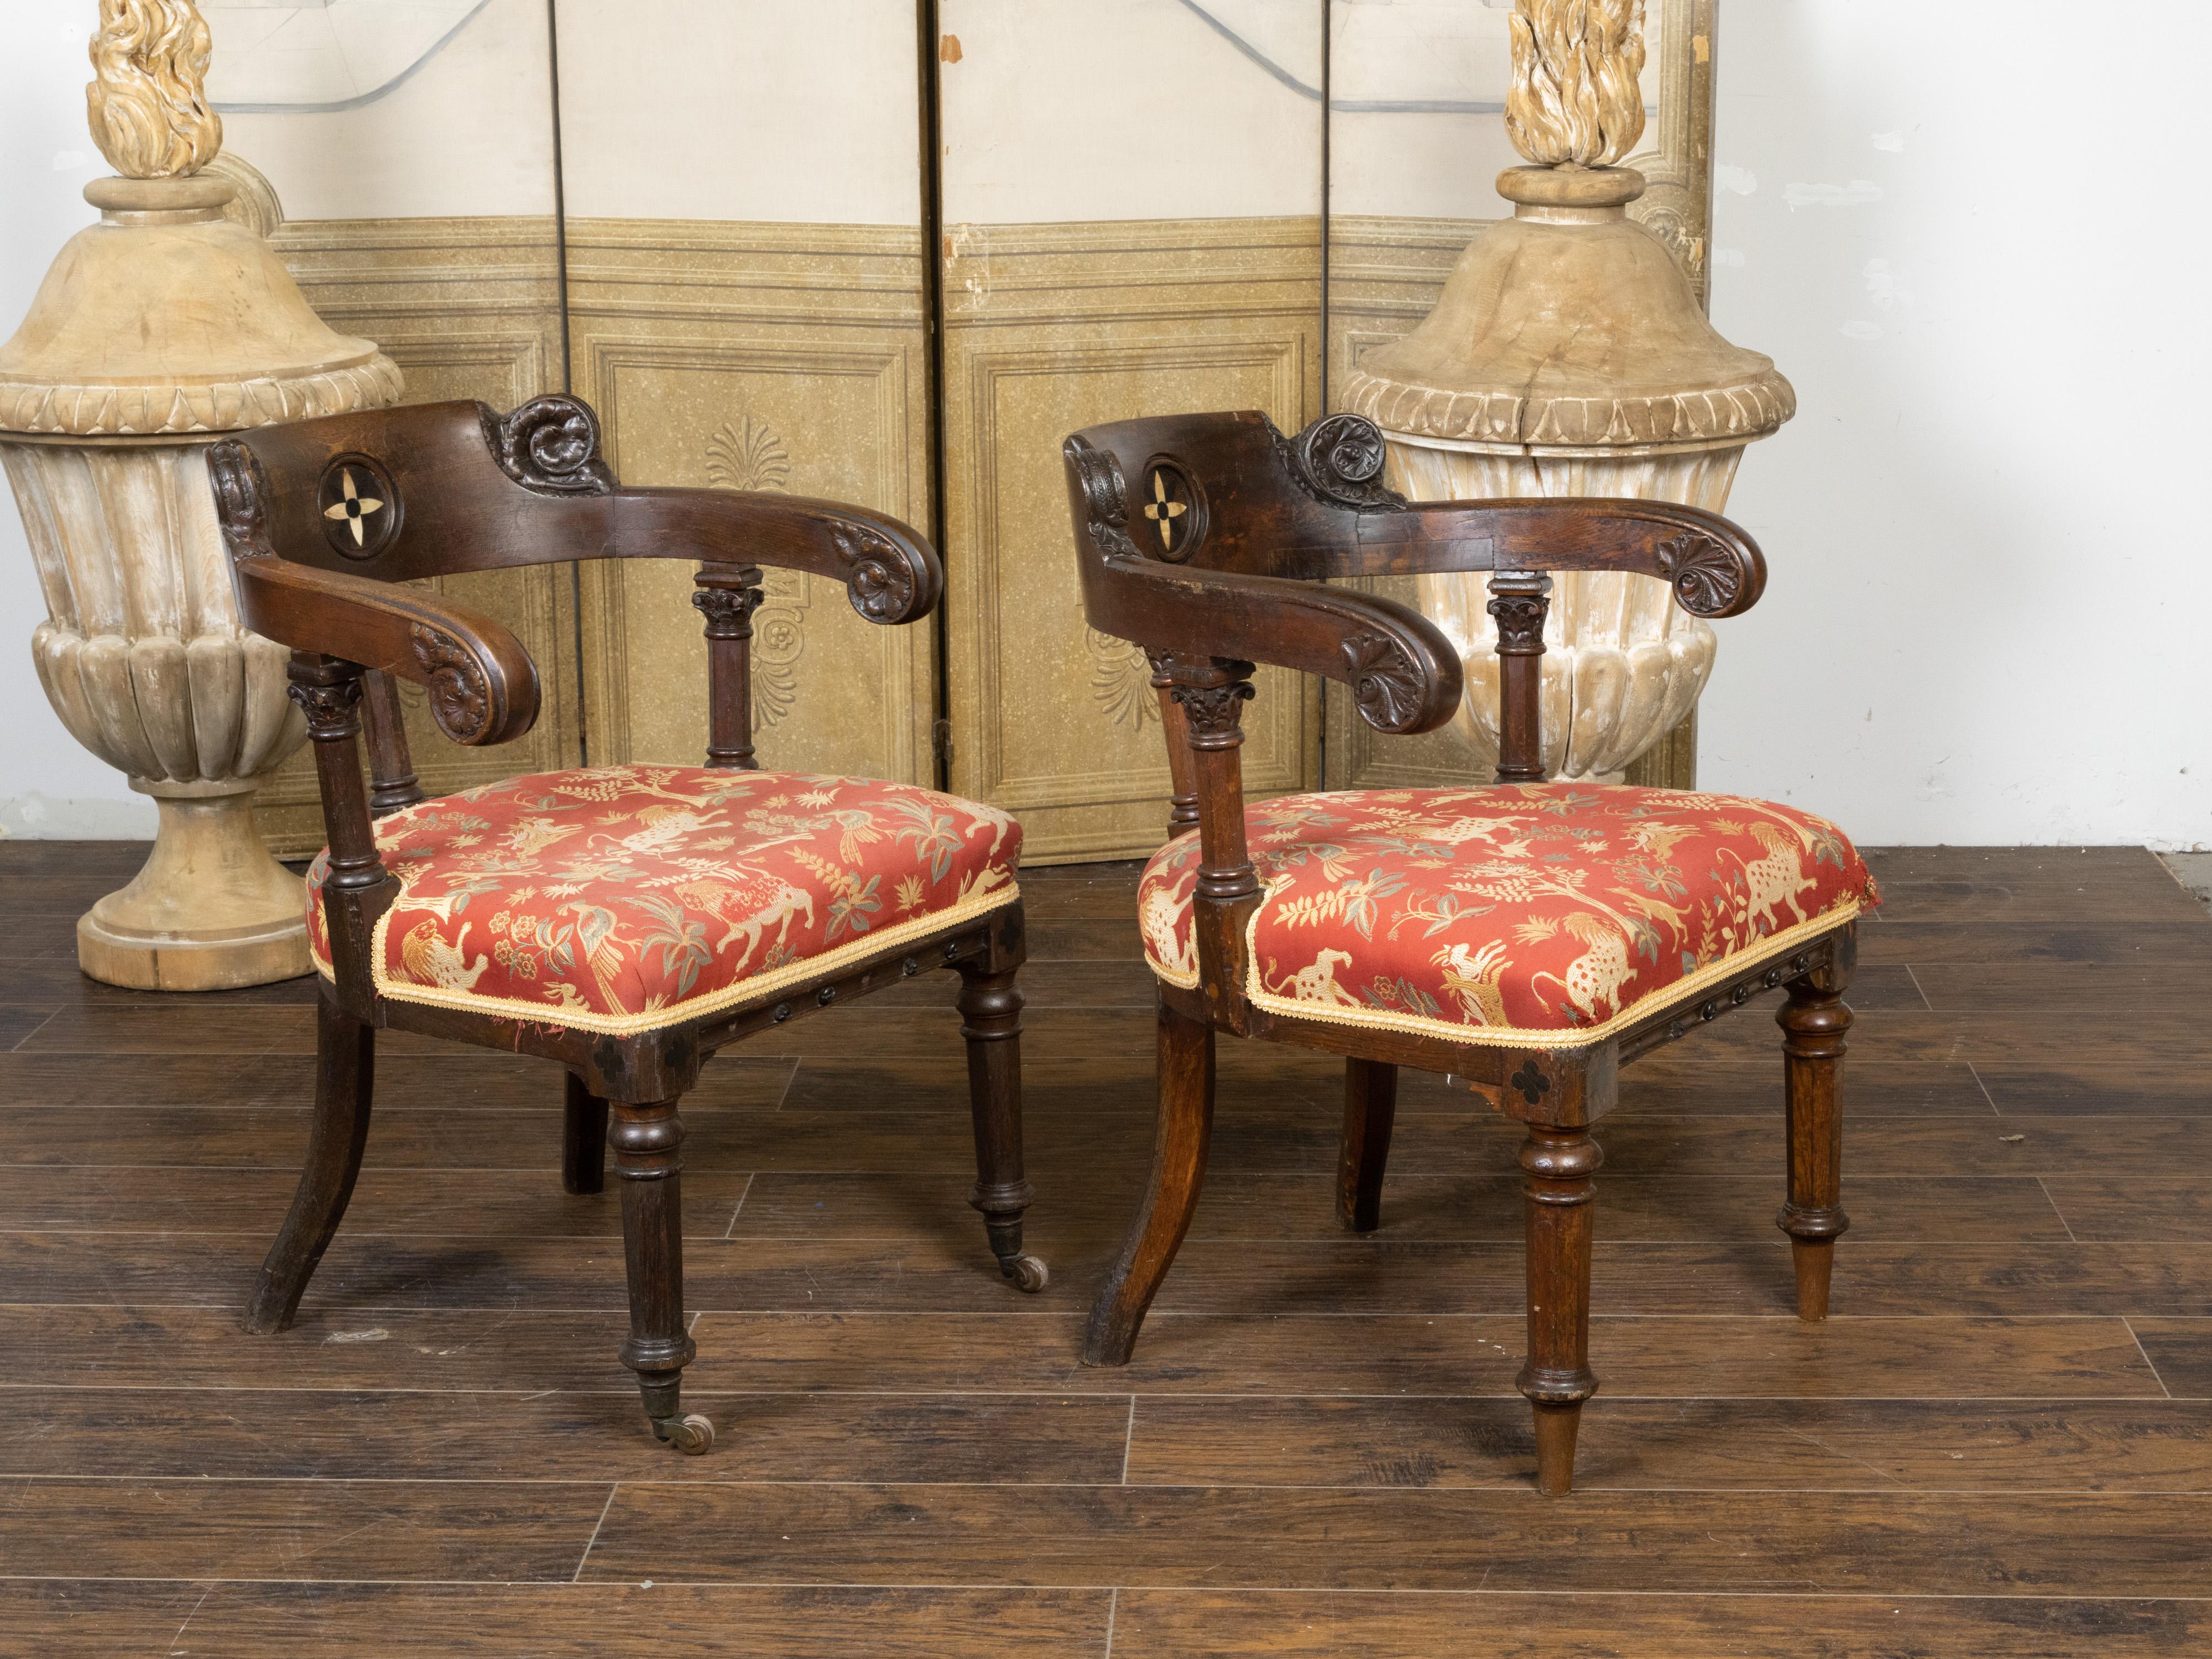 Pair of English Regency Style Carved Oak Klismos Chairs with Horseshoe Backs For Sale 2